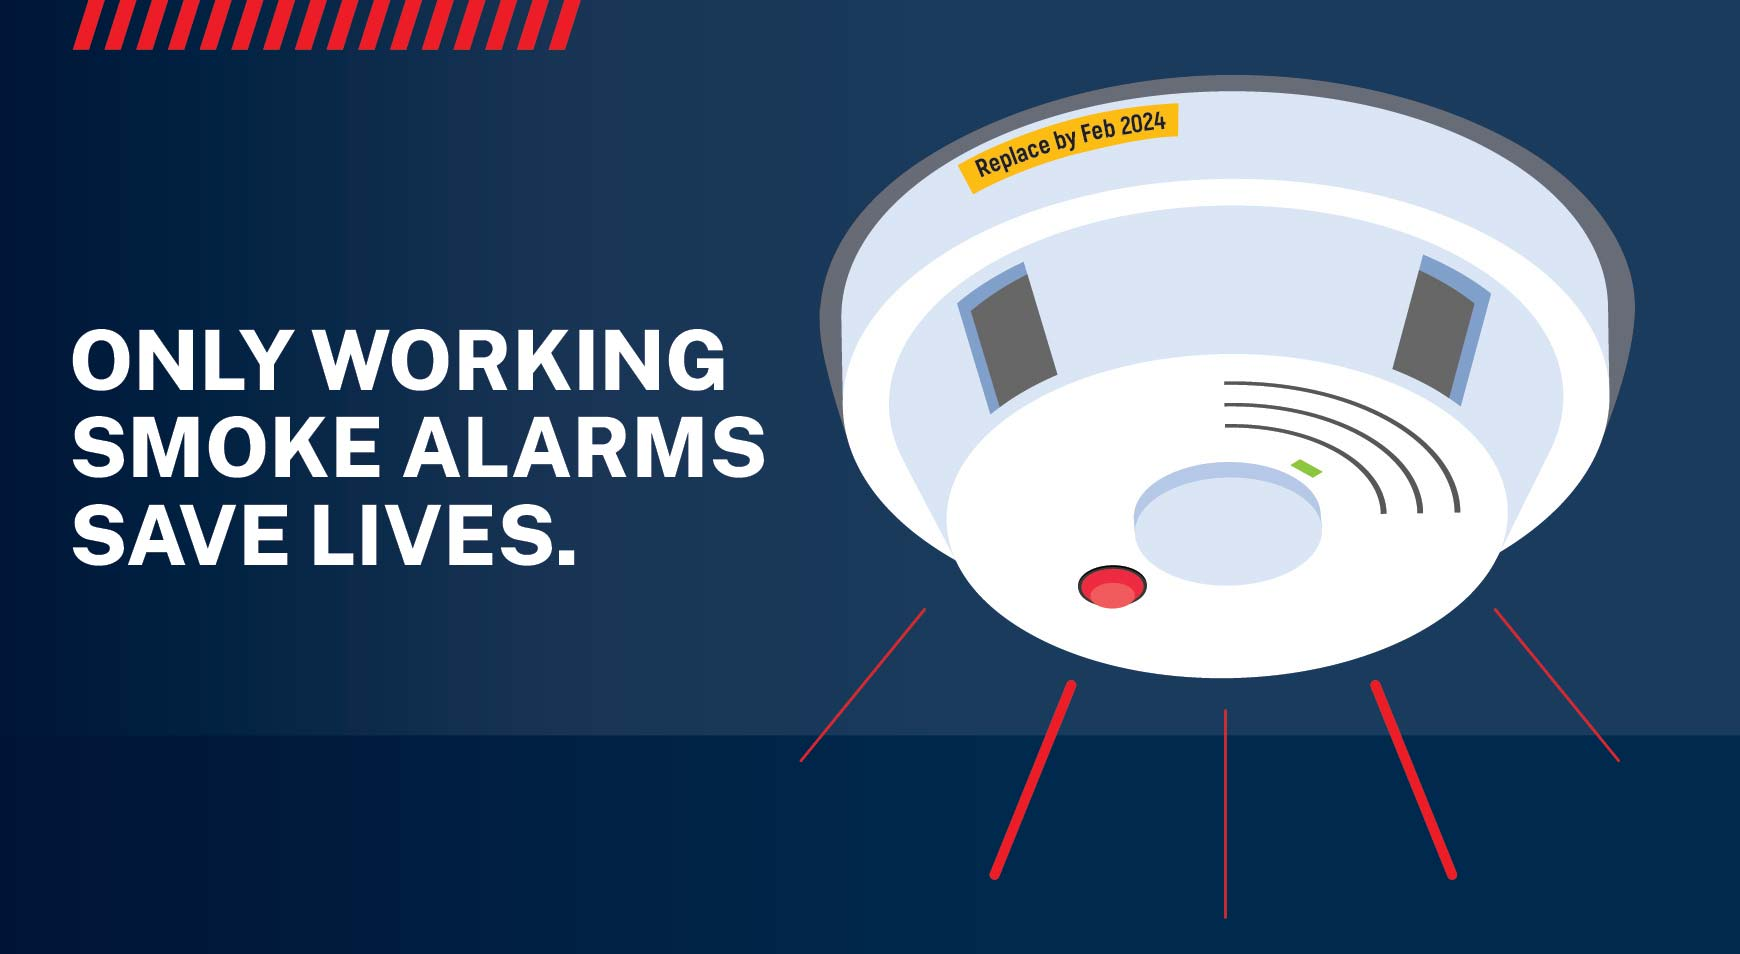 Only working smoke alarms save lives.